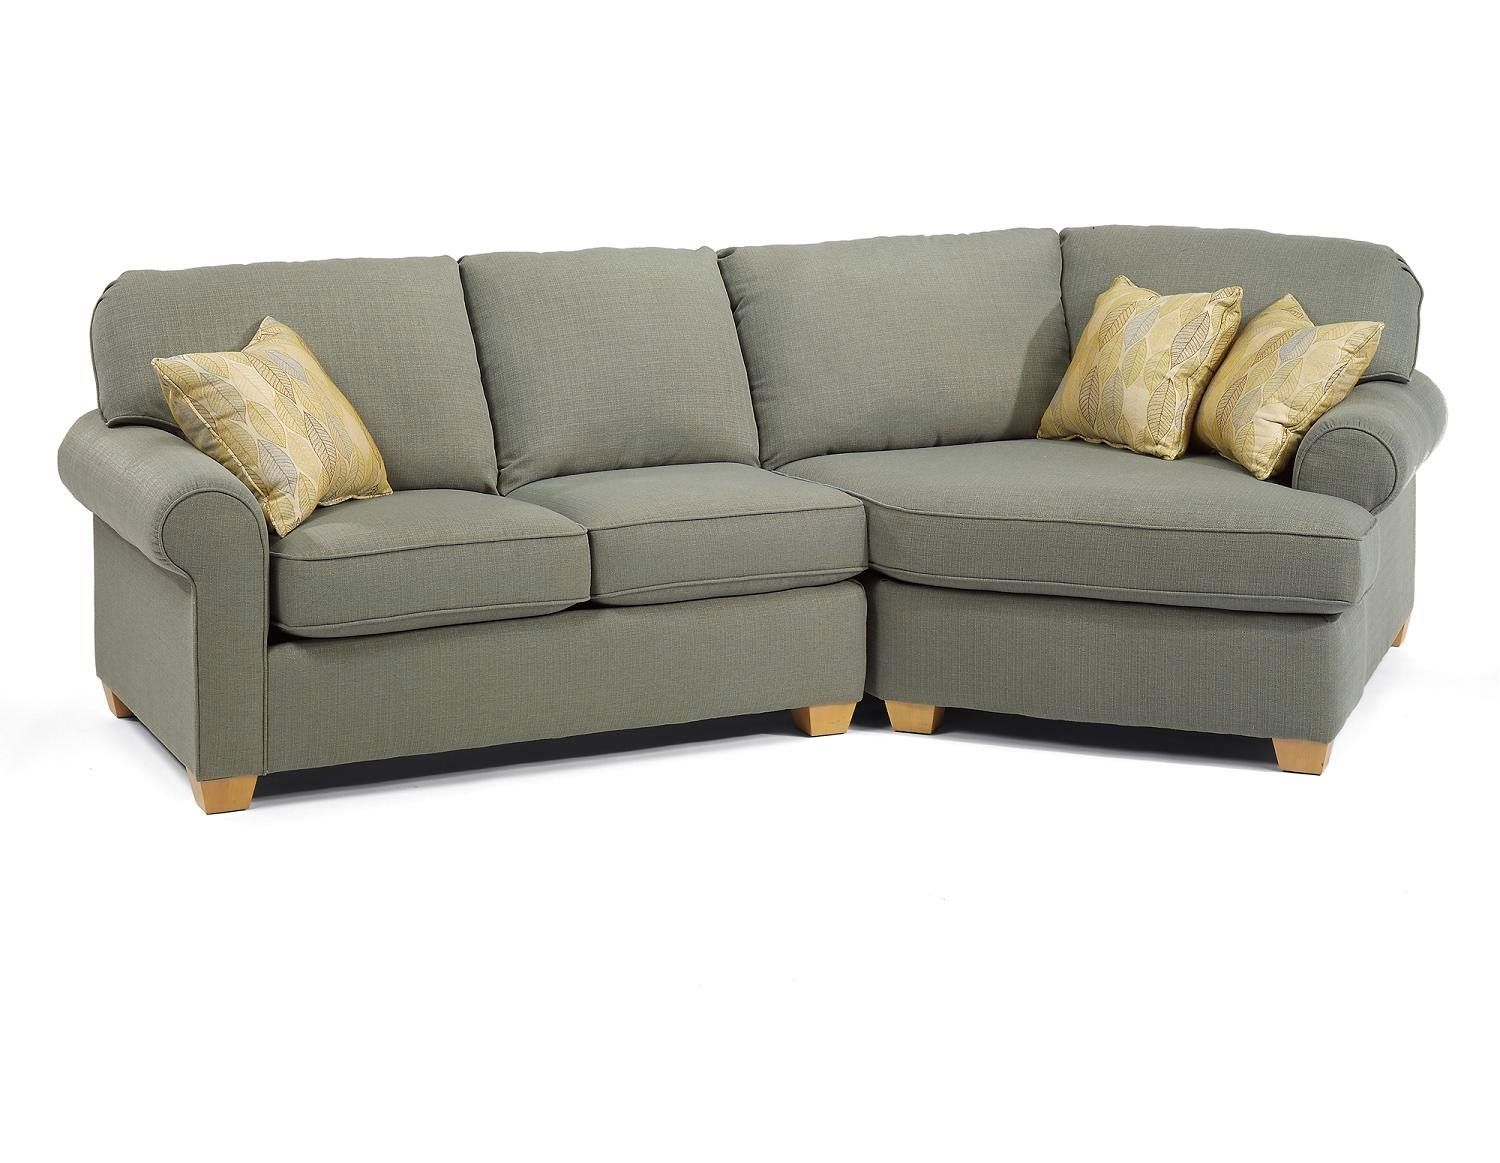 Small Sectional Sofa Small Sectional Sofa Basement Youtube Throughout Condo Sectional Sofas (Photo 8 of 15)